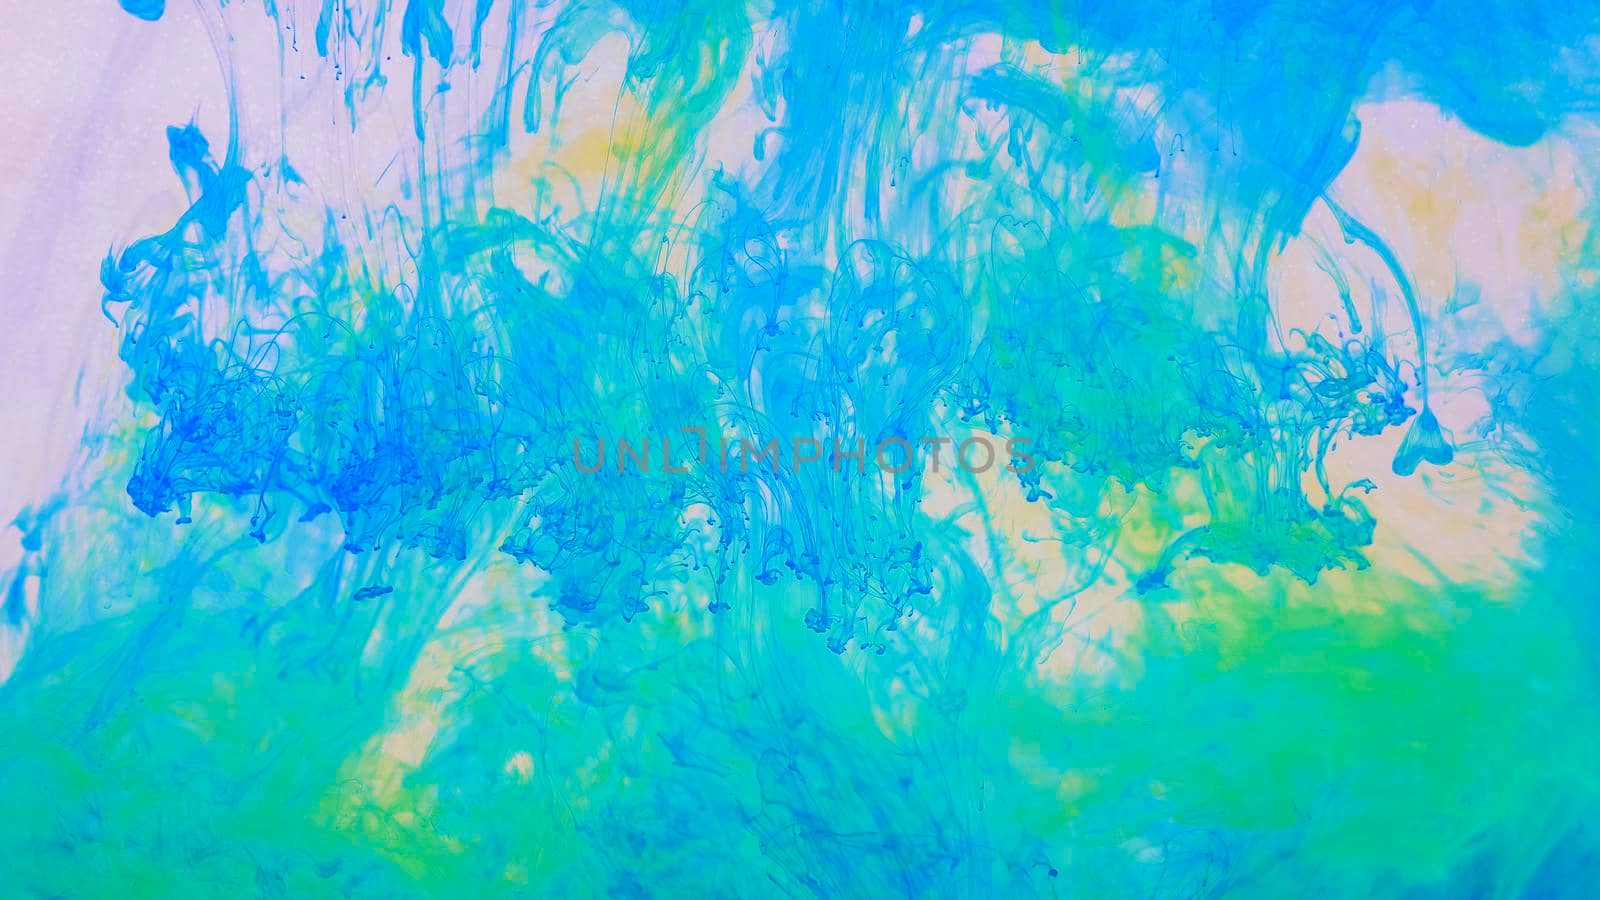 Drops of blue and yellow paint dissolved in water. Shades of green. Deep ink spaces. Unique, natural background.